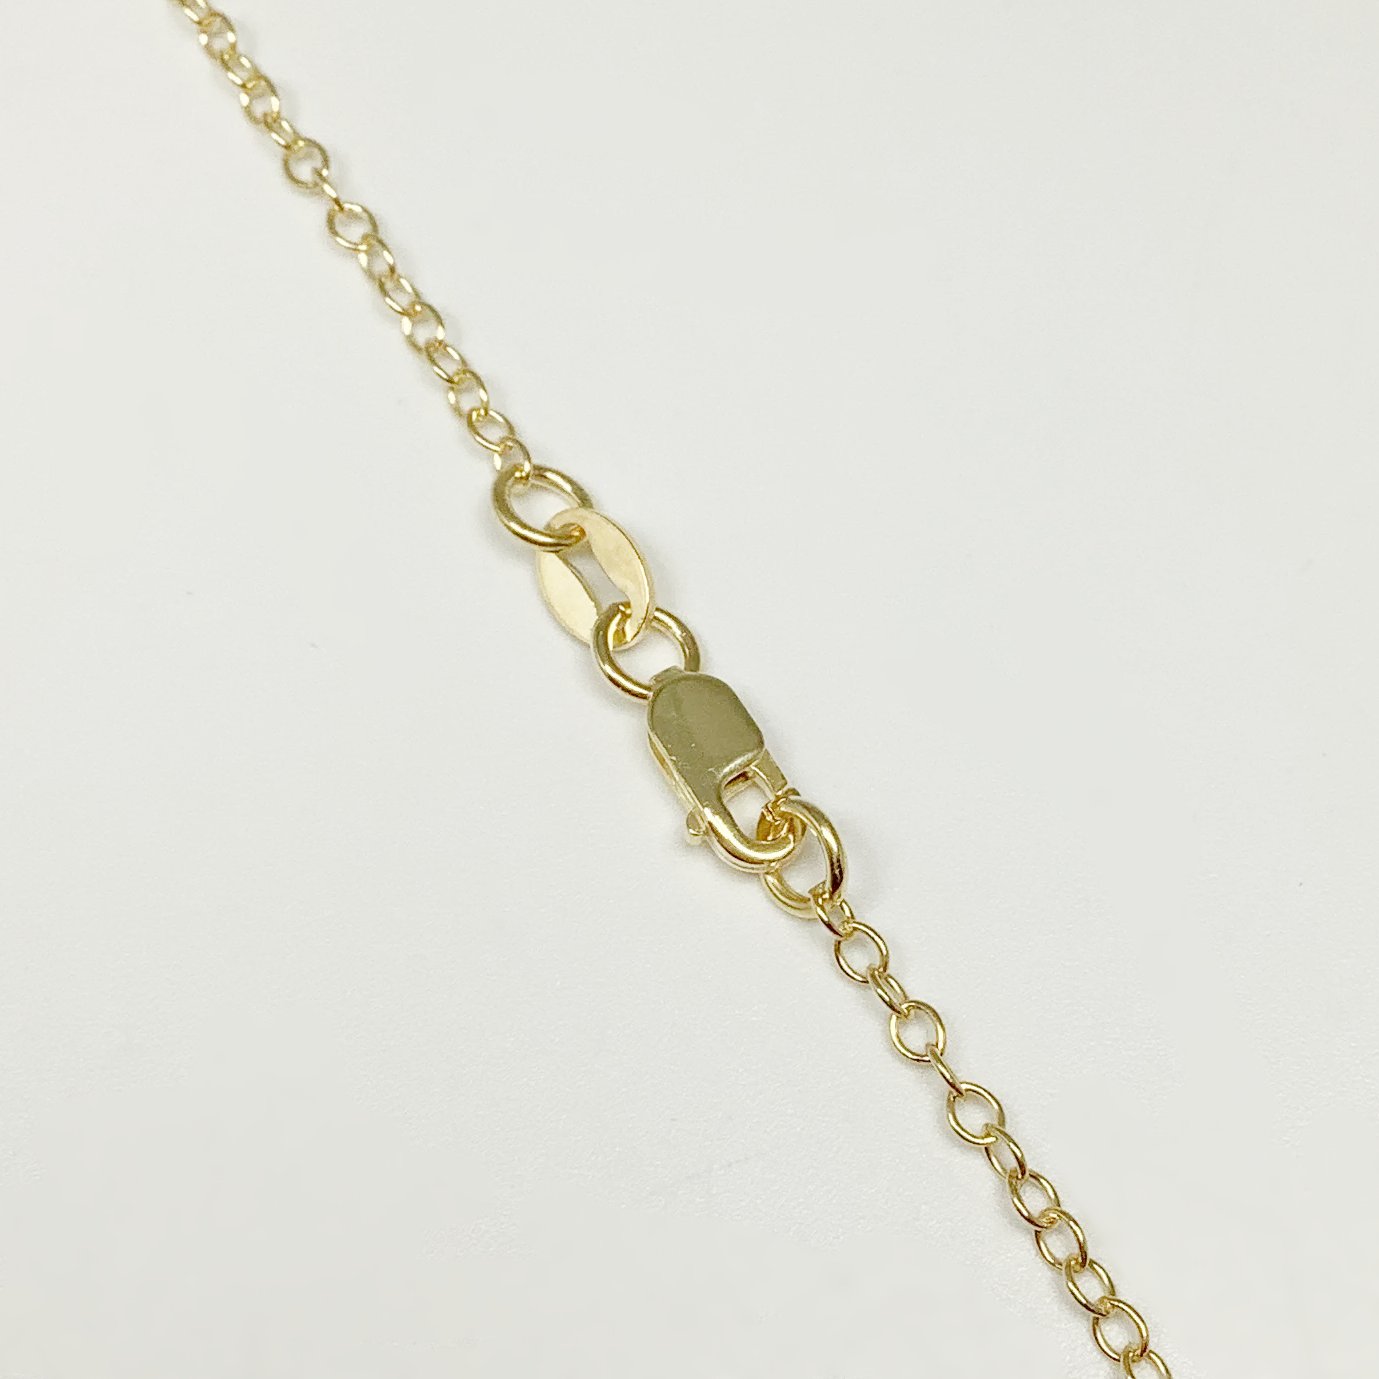 Gold Plated Chain - Oval Link Style